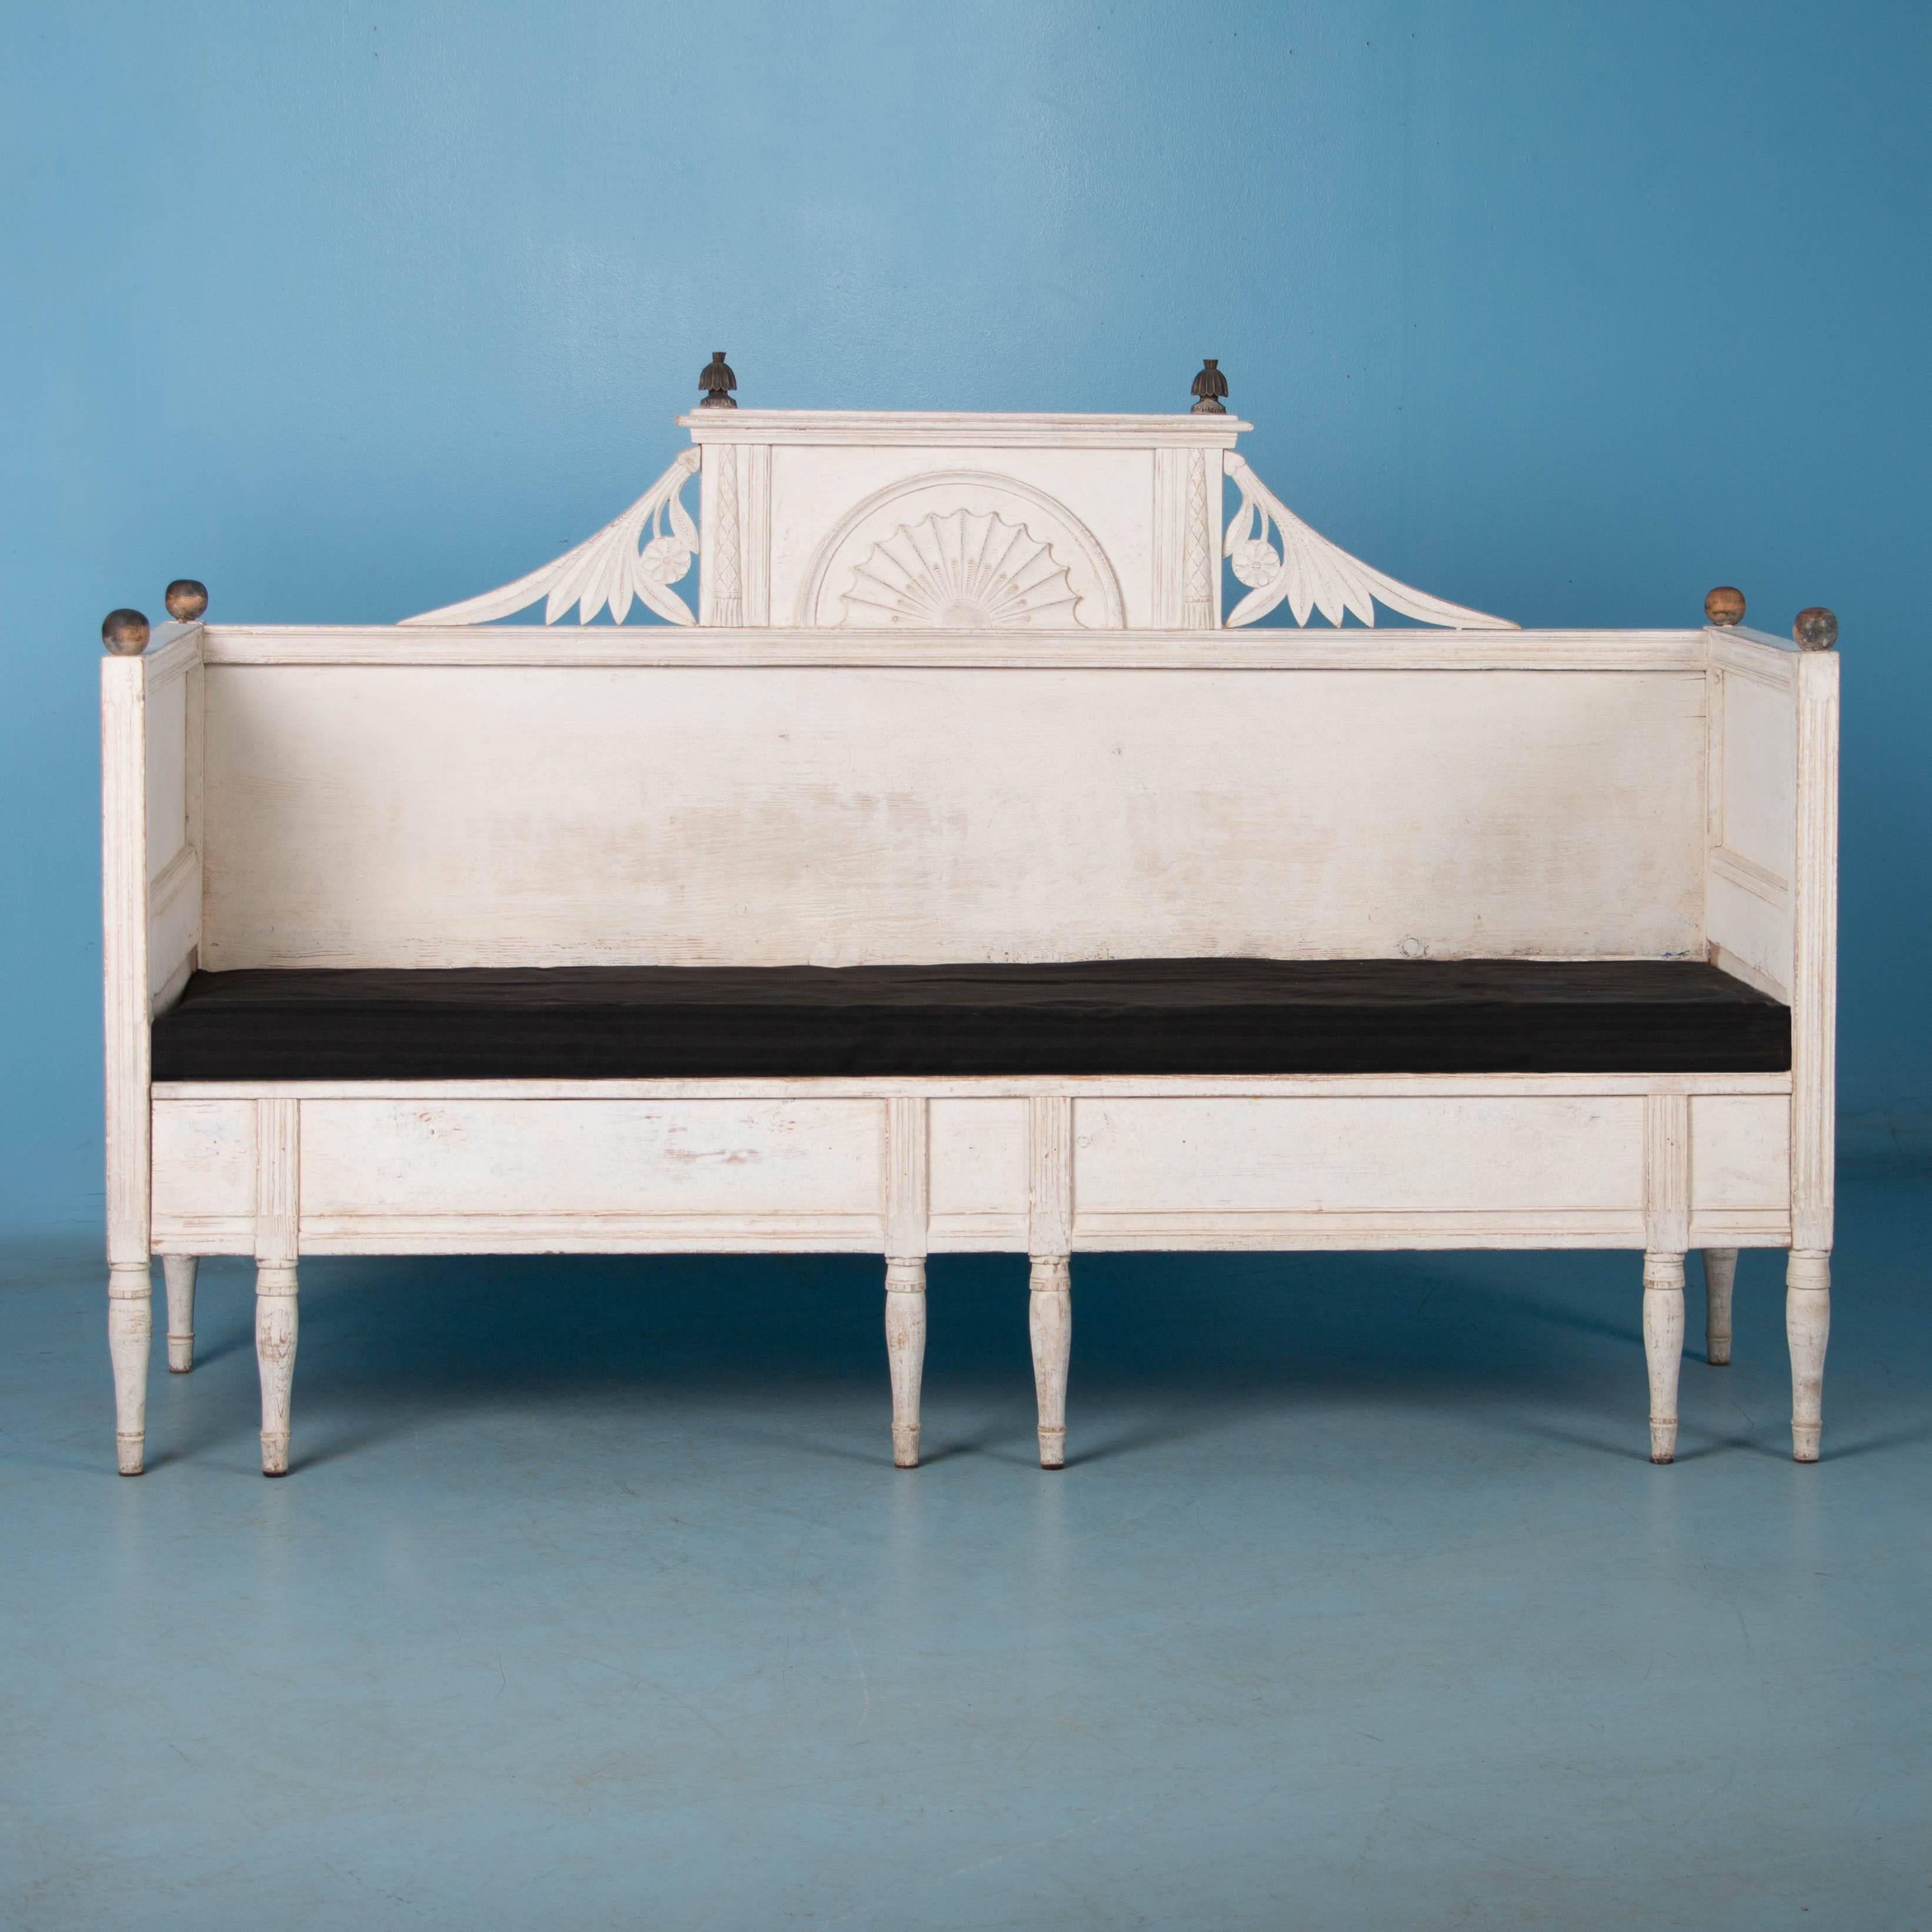  This lovely pine bench is a wonderful example of Swedish Gustavian country craftsmanship. The lightly distressed white paint with black finials and carved details add to its allure. The seat opens to reveal  a storage space below.  This style of